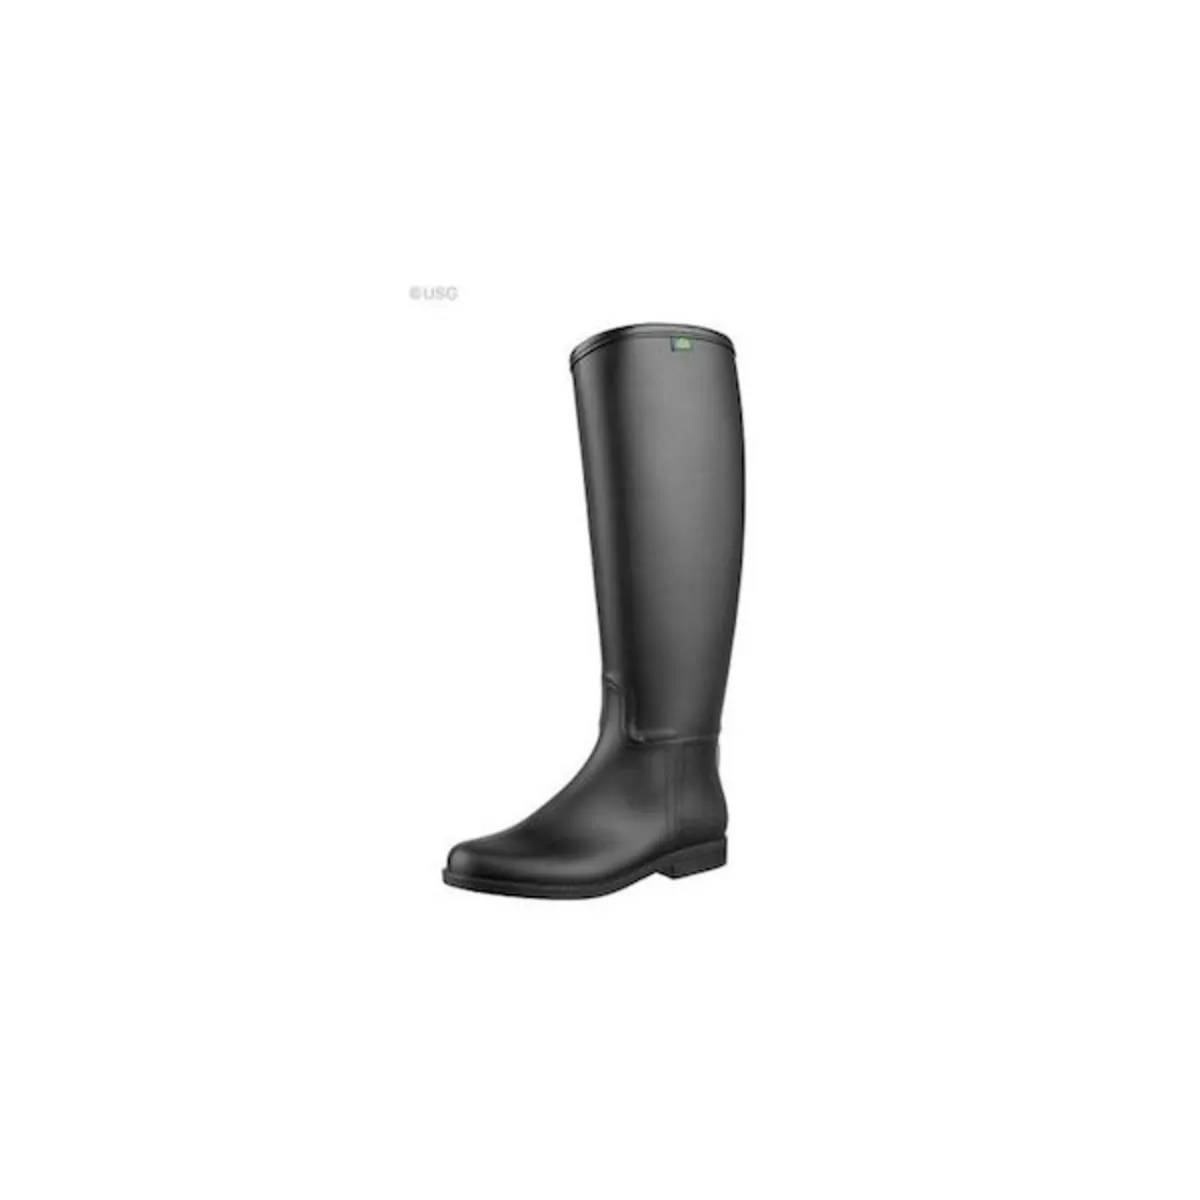 Rubber Riding Boots- nationwide Delivery